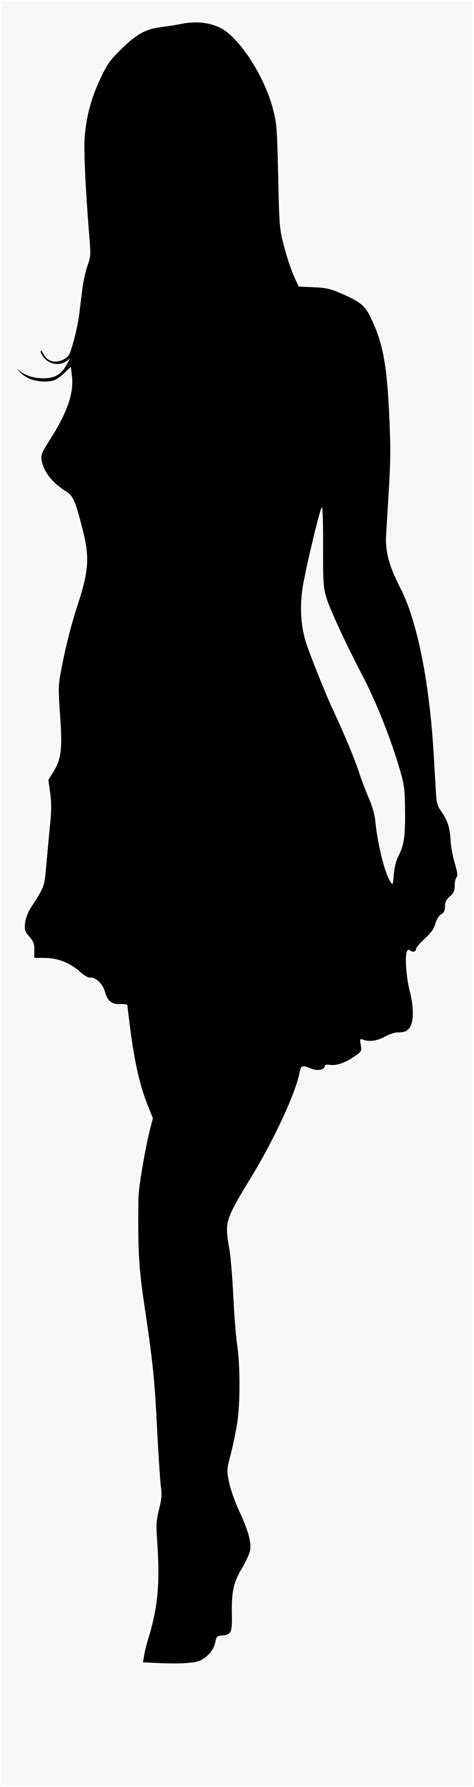 Female Silhouette Png Download Female Silhouettes Png Transparent